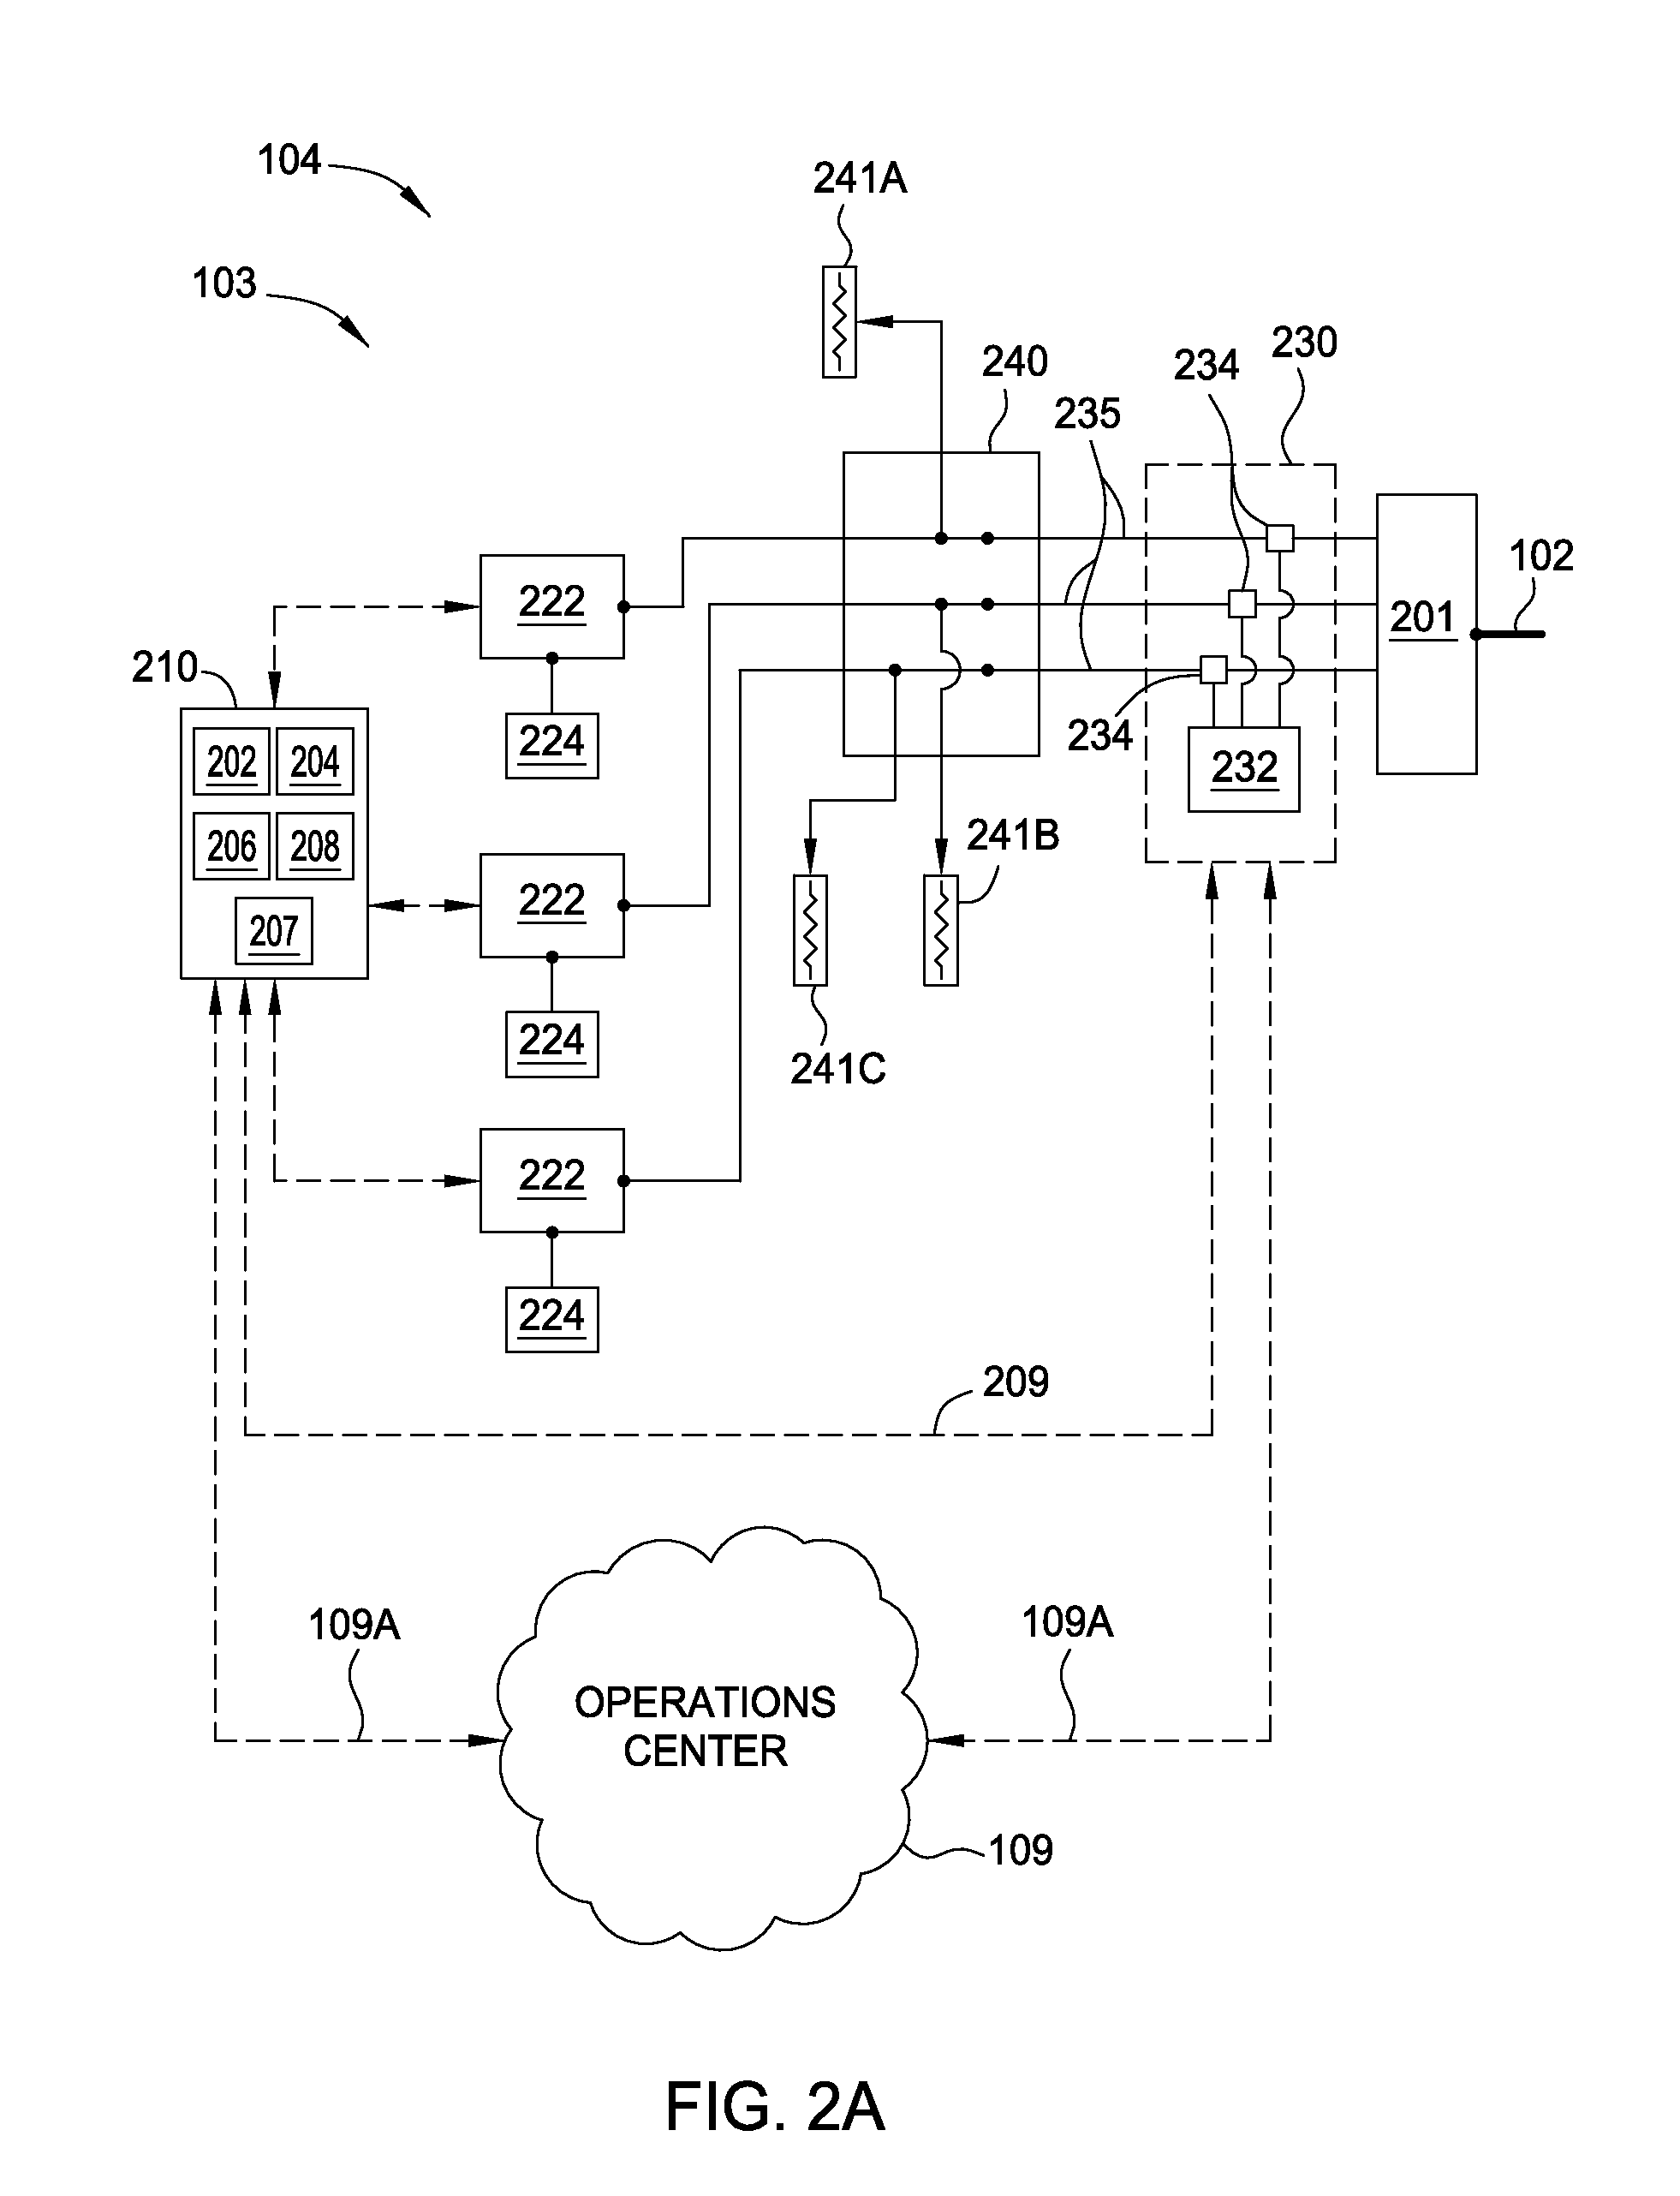 Method and apparatus for balancing power on a per phase basis in multi-phase electrical load facilities using an energy storage system